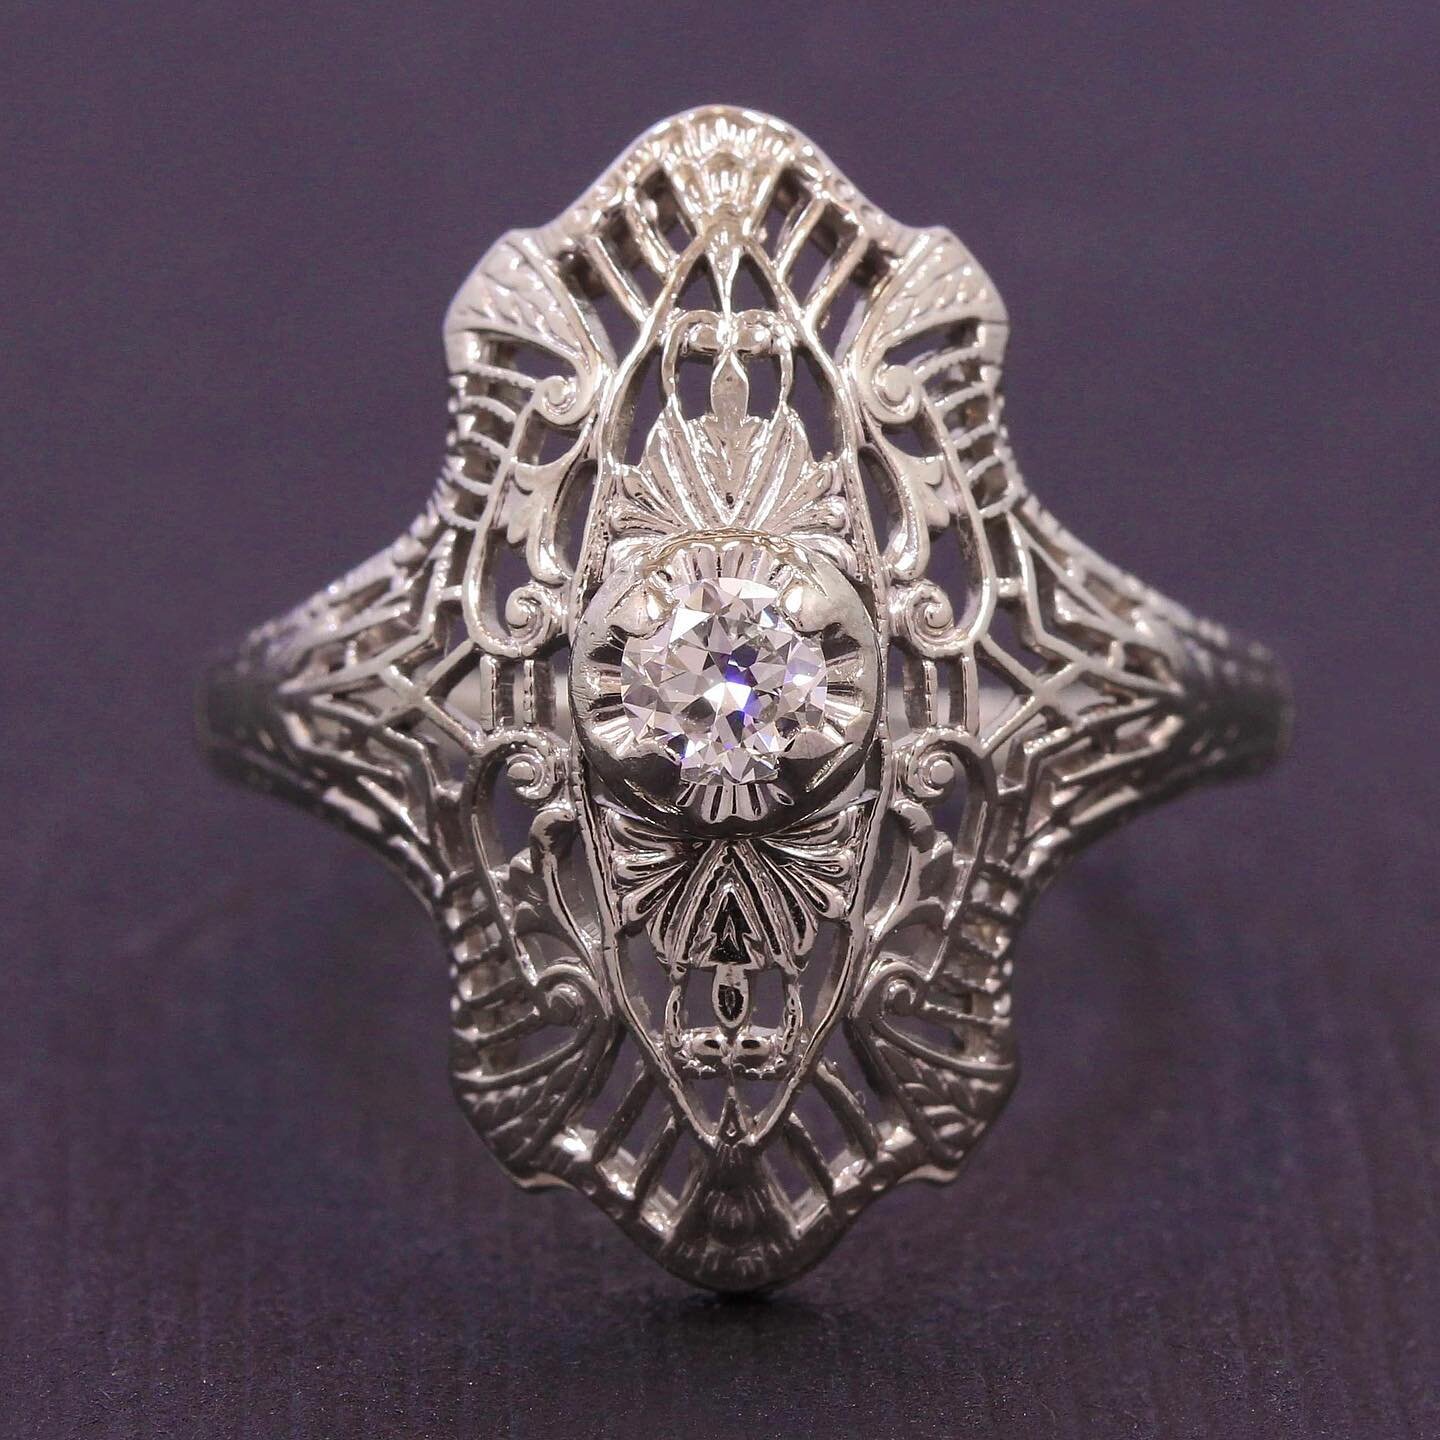 Art Deco Diamond filigree rings may get old (because they were made to last!) but they never go out of style! This one is absolutely phenomenal. Just look at that antique diamond! 🔥 New on Etsy. $429 shipping included!